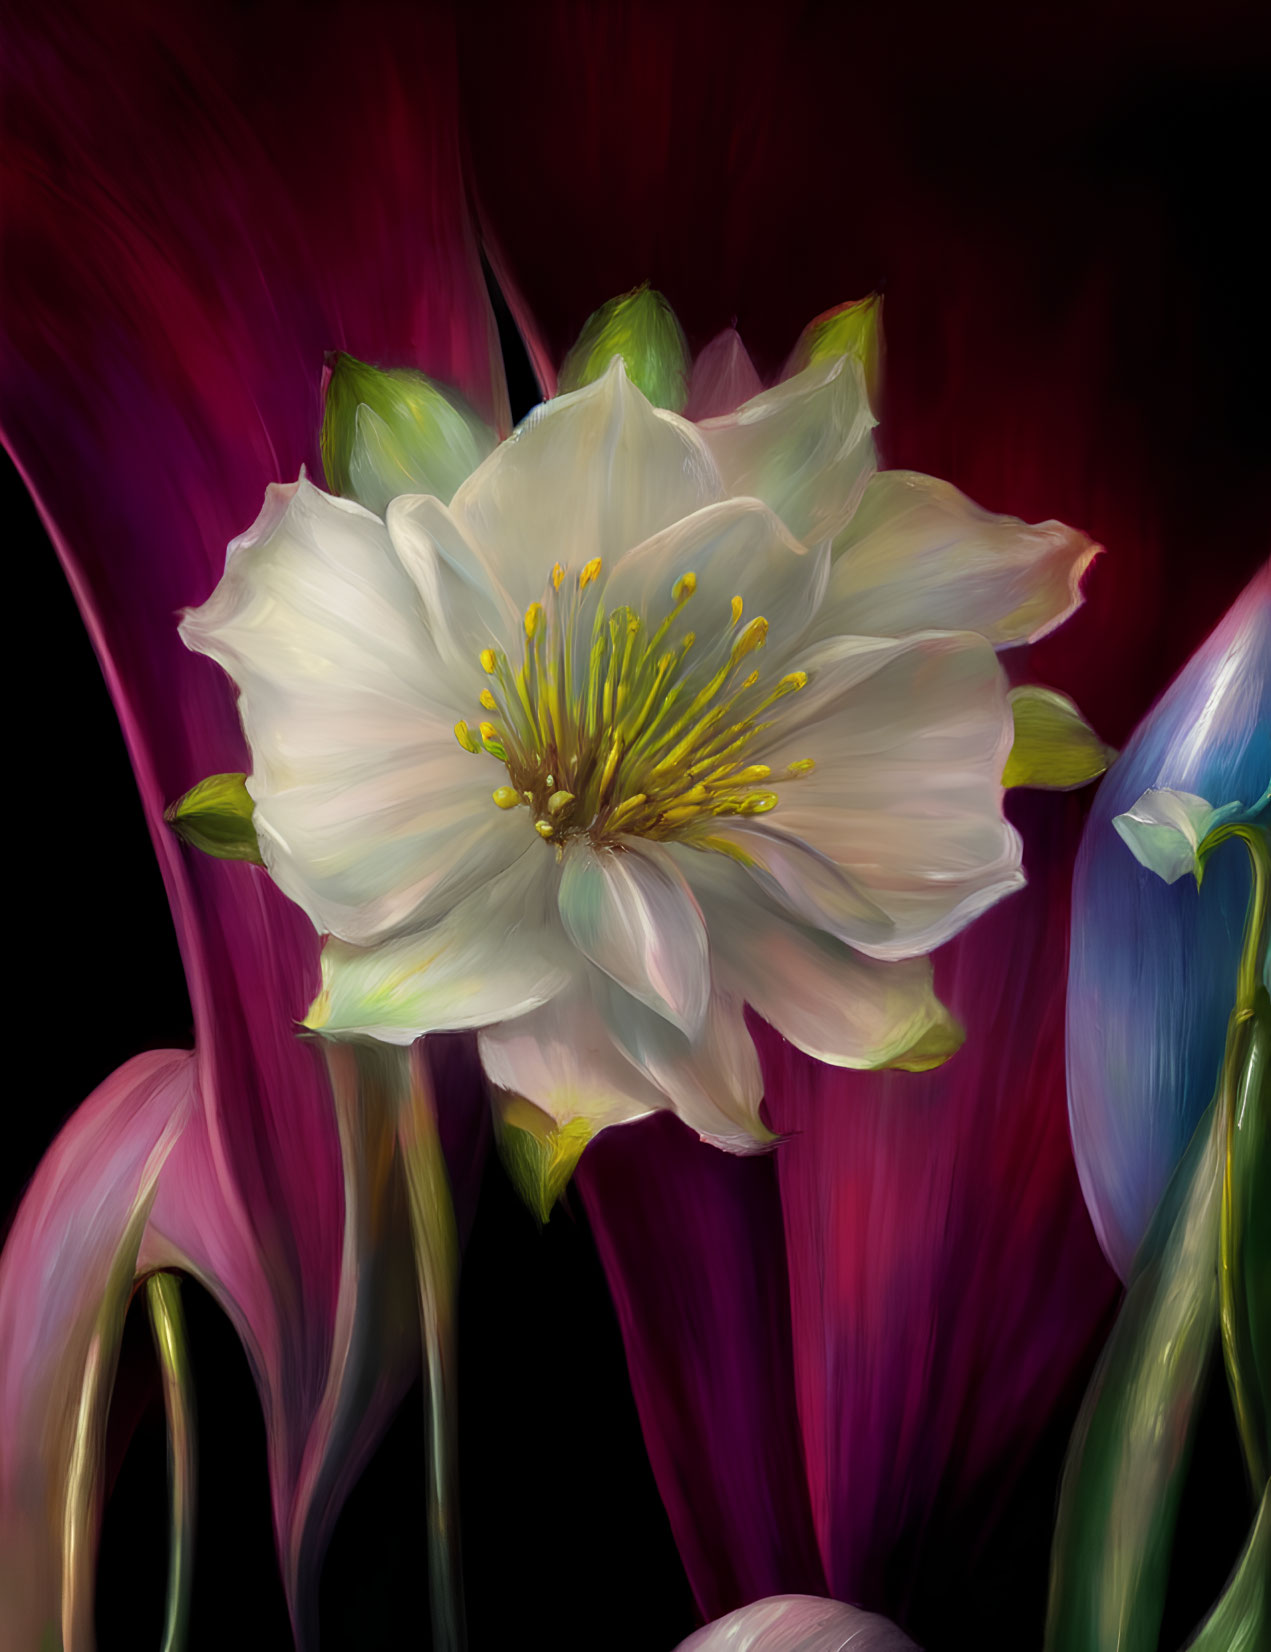 White Flower with Yellow Stamens in Digital Painting Against Dark Background